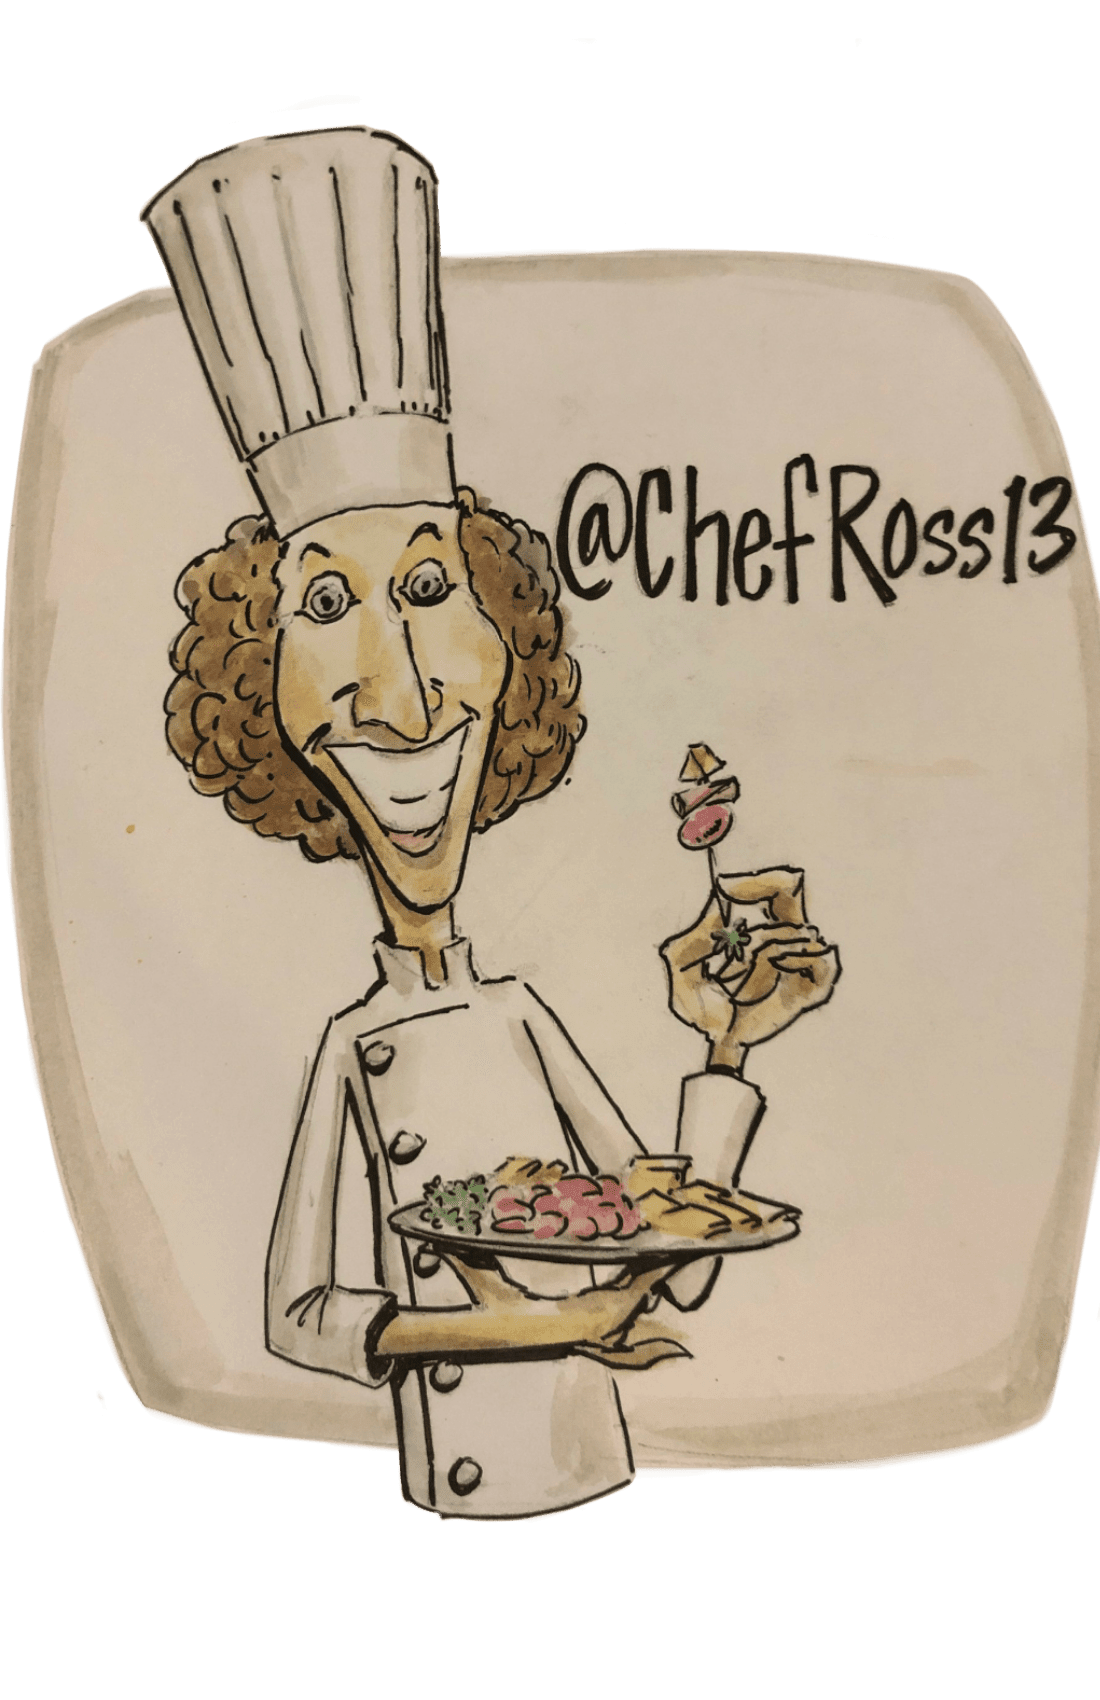 Chef Ross Catering